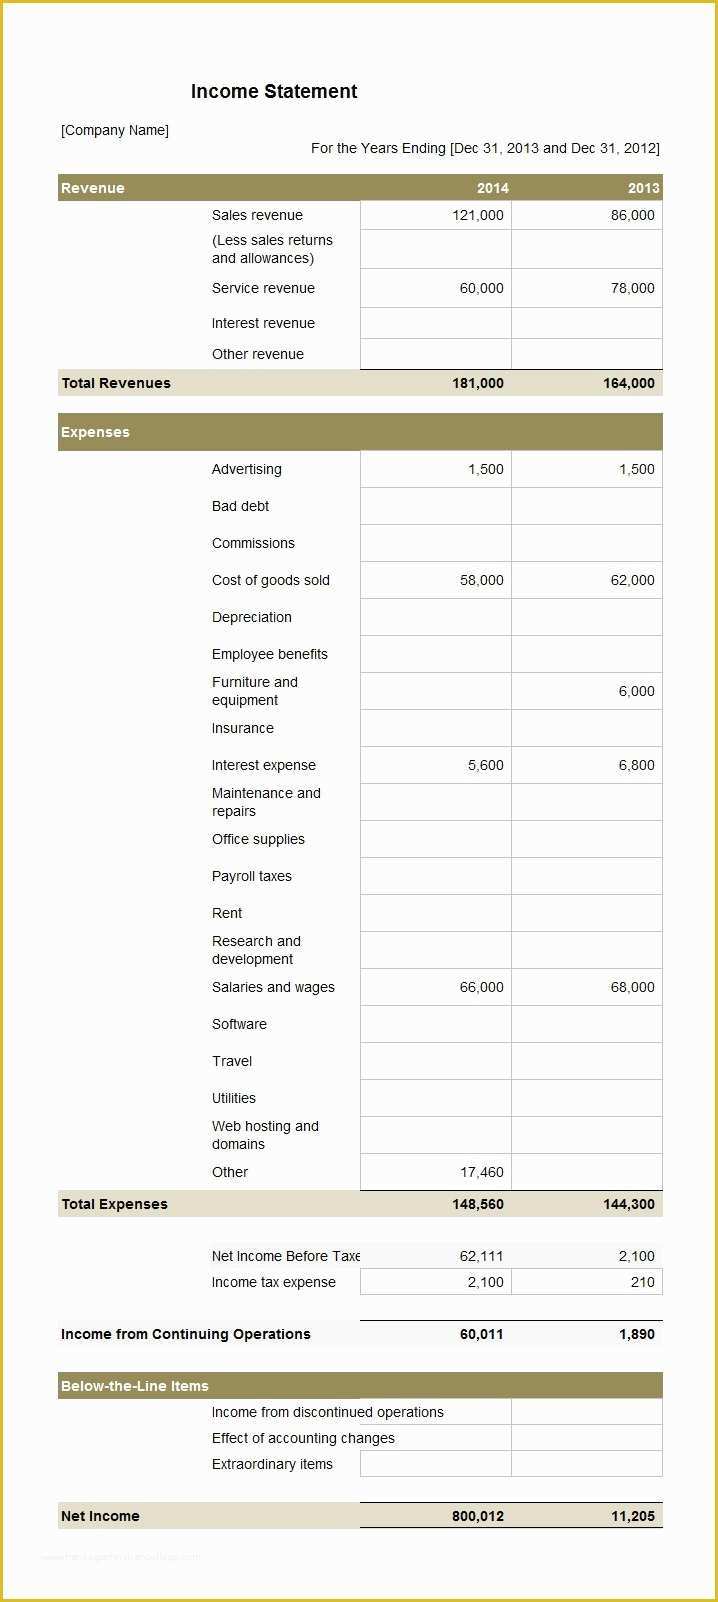 Free Earnings Statement Template Of 27 Free In E Statement Examples & Templates Single